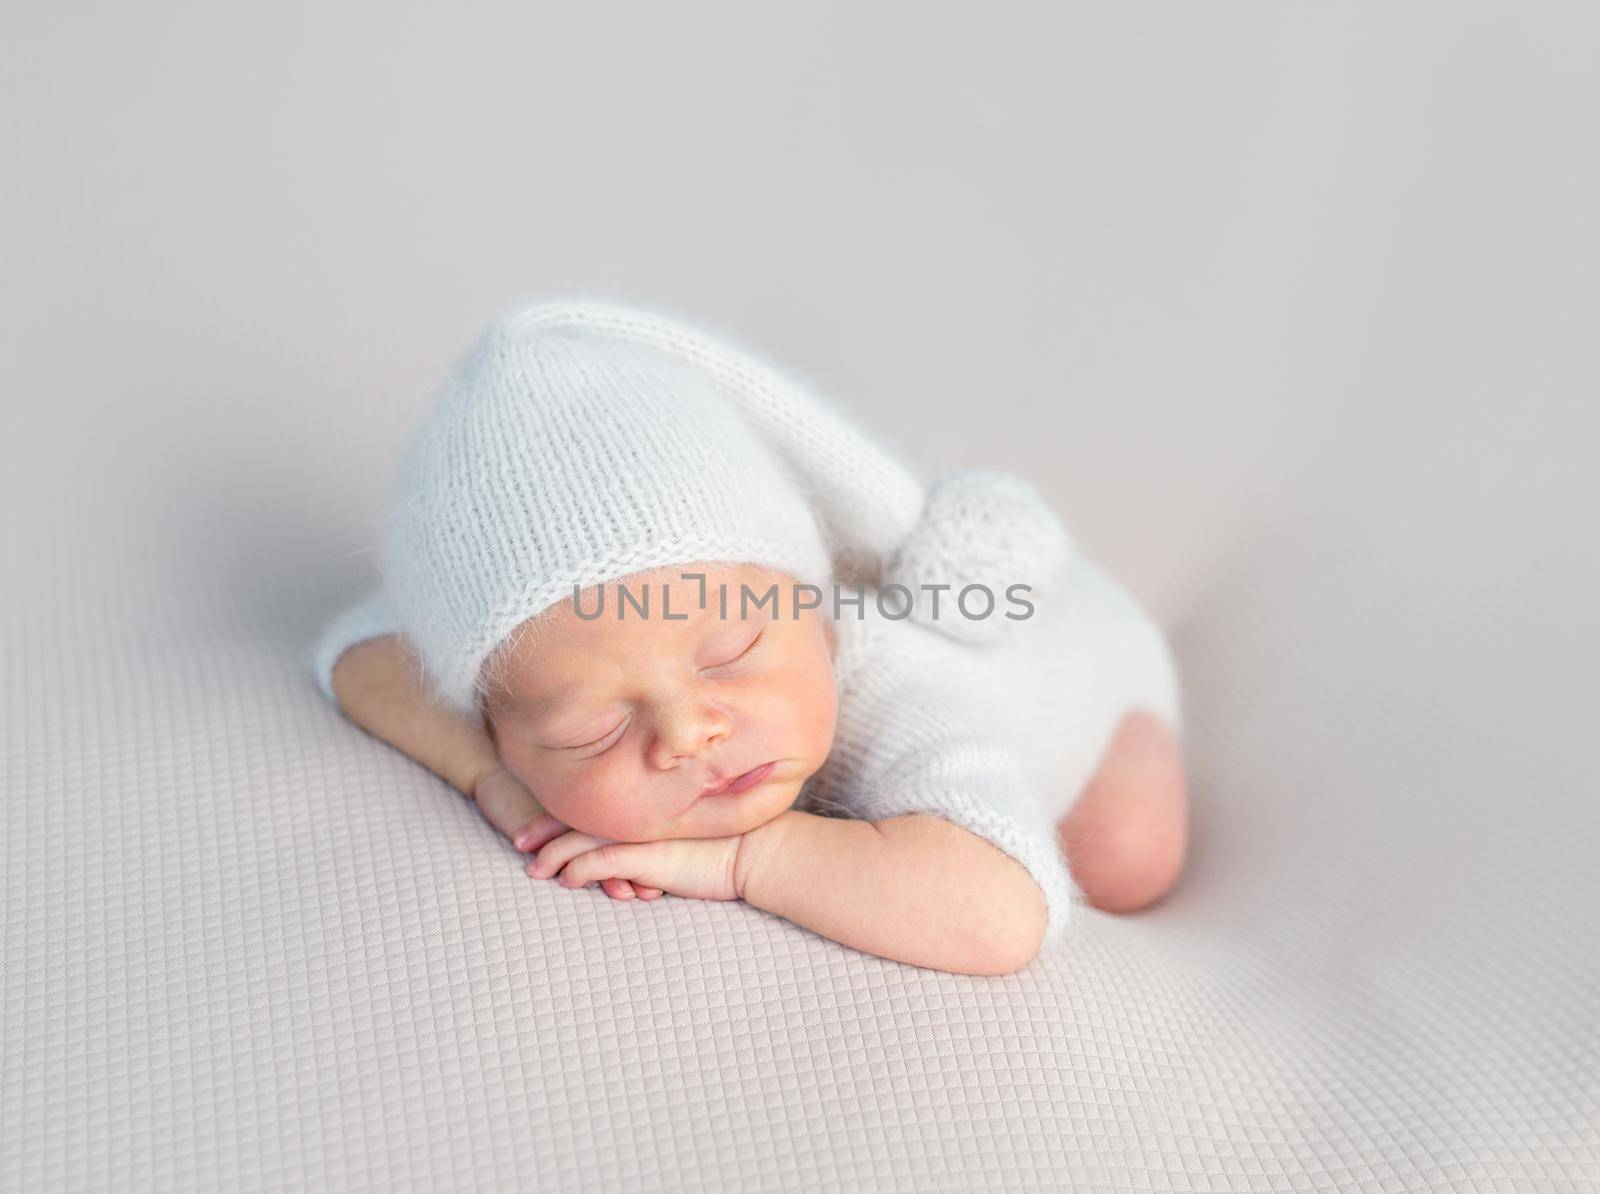 Cute little baby in white hat and knitted suit sweetly sleeping